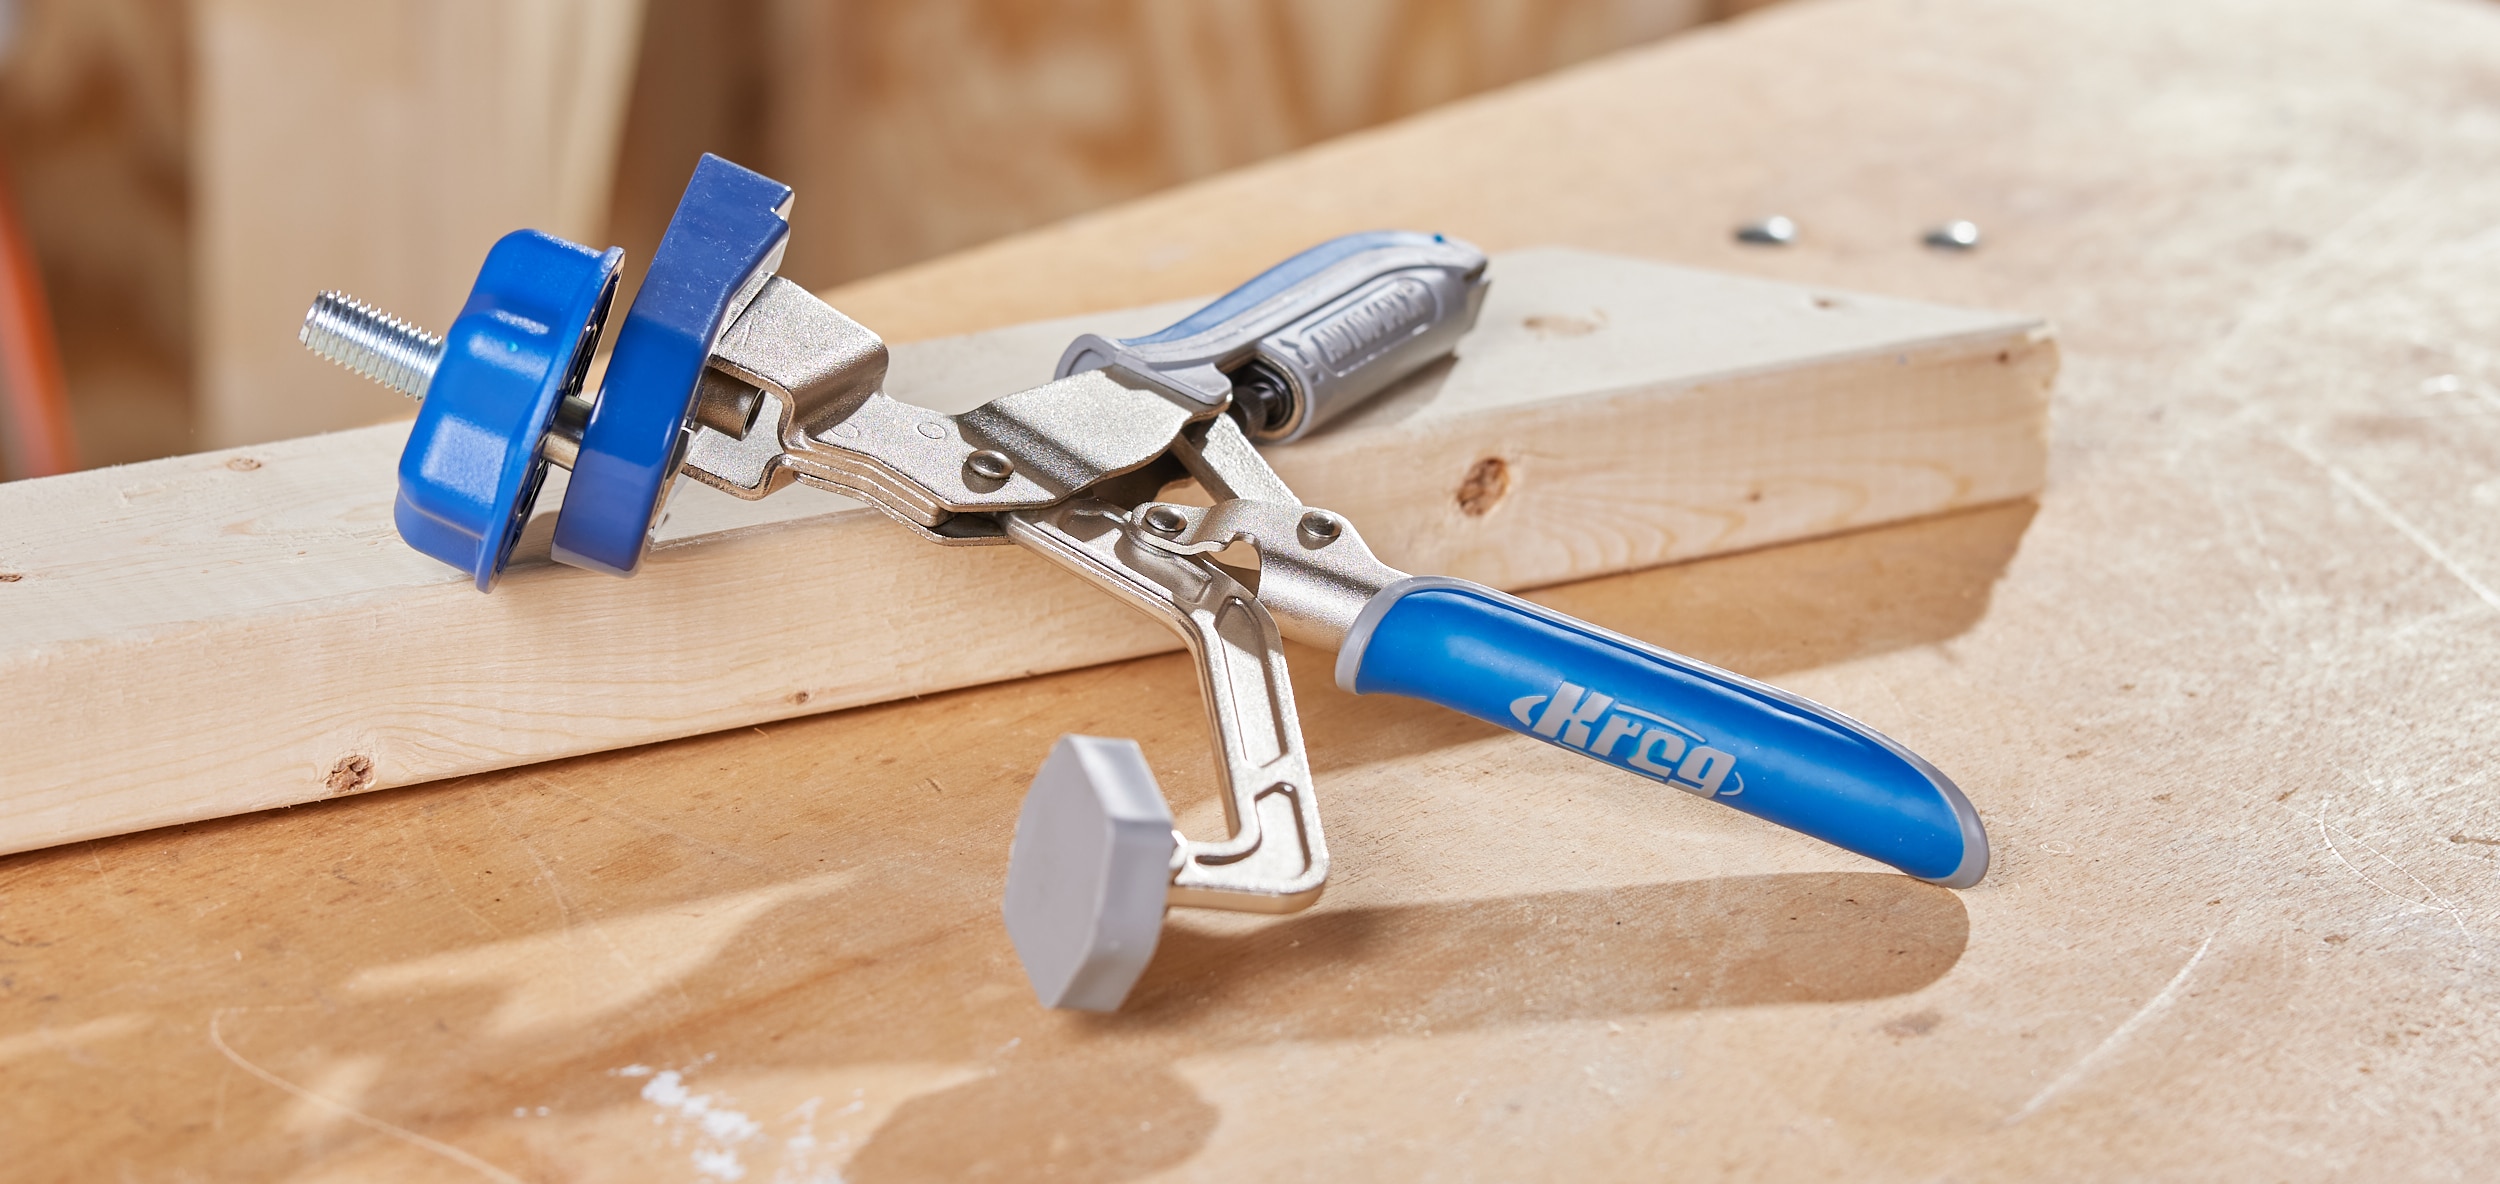 Kreg Bench Clamp with Bench Clamp Base